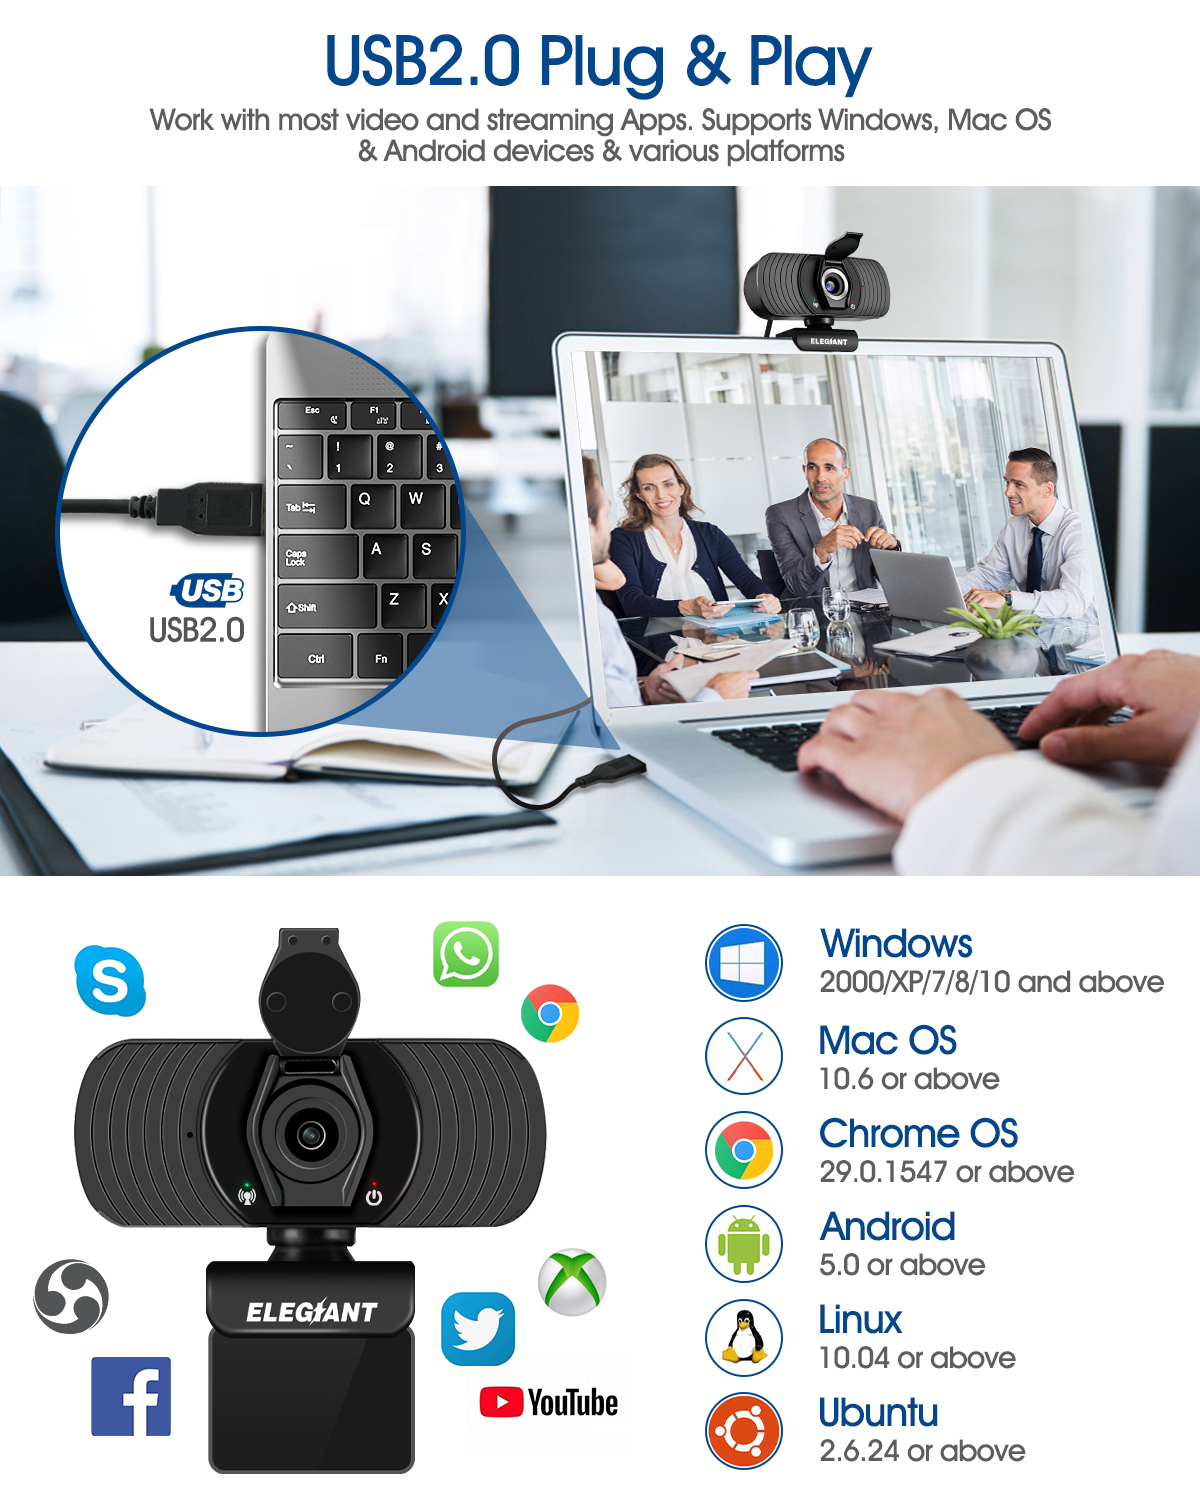 ELEGIANT EGC-C01 1080P HD Webcam with Privacy Cover Built-in Mic for Video Calls Conference Gaming USB Plug & Play for Windows for Mac OS Android